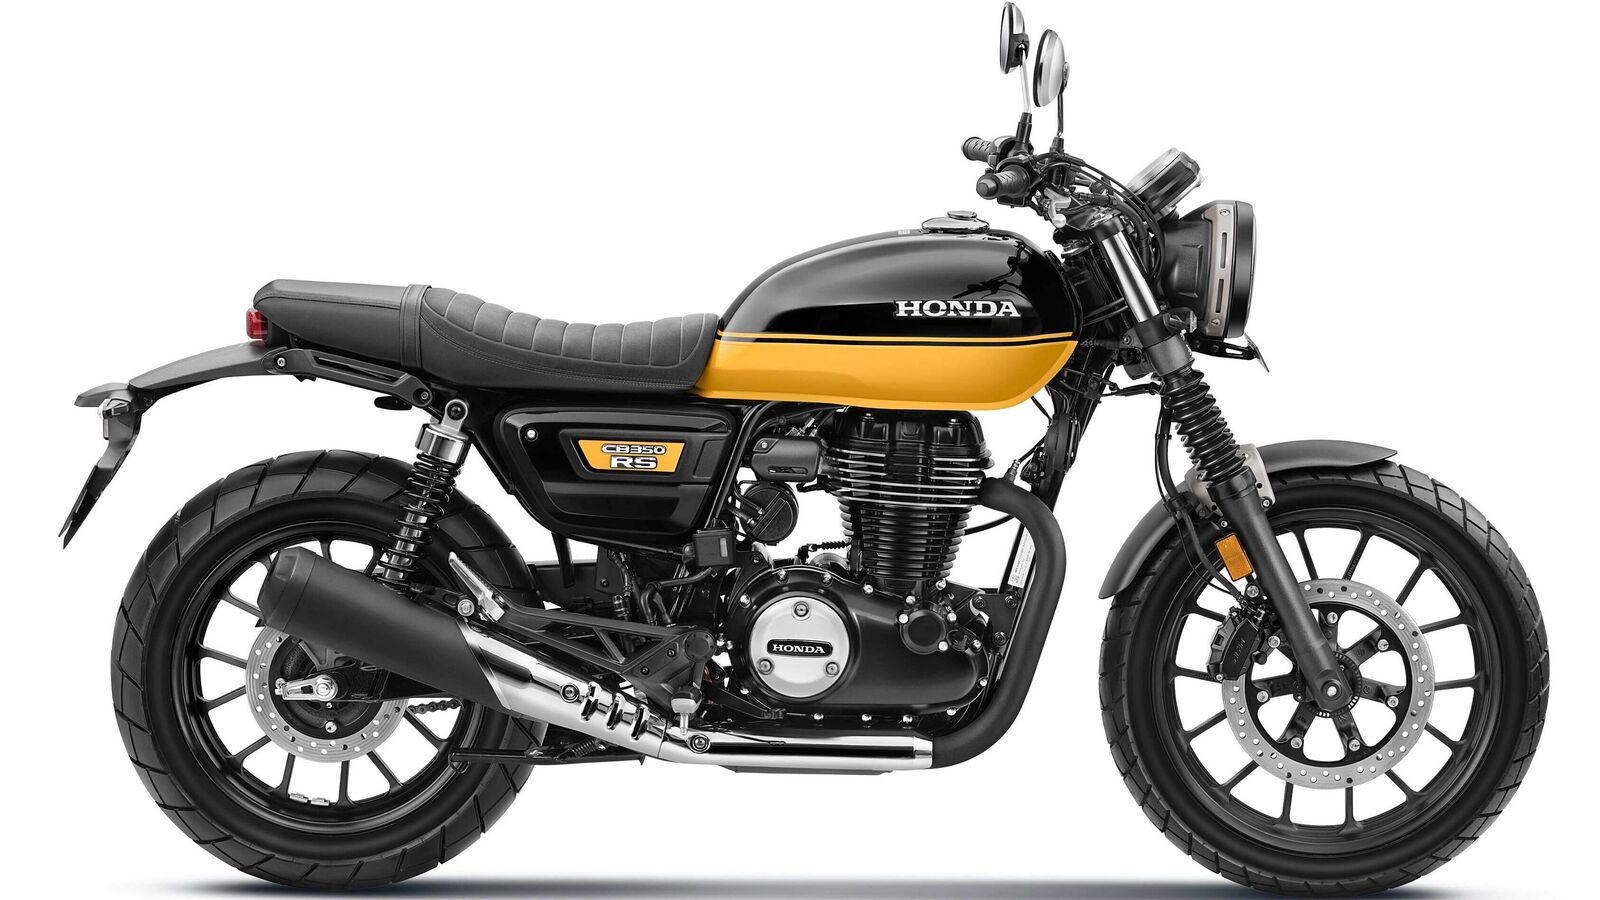 Honda CB350 RS Cafe Racer to be launched on March 2